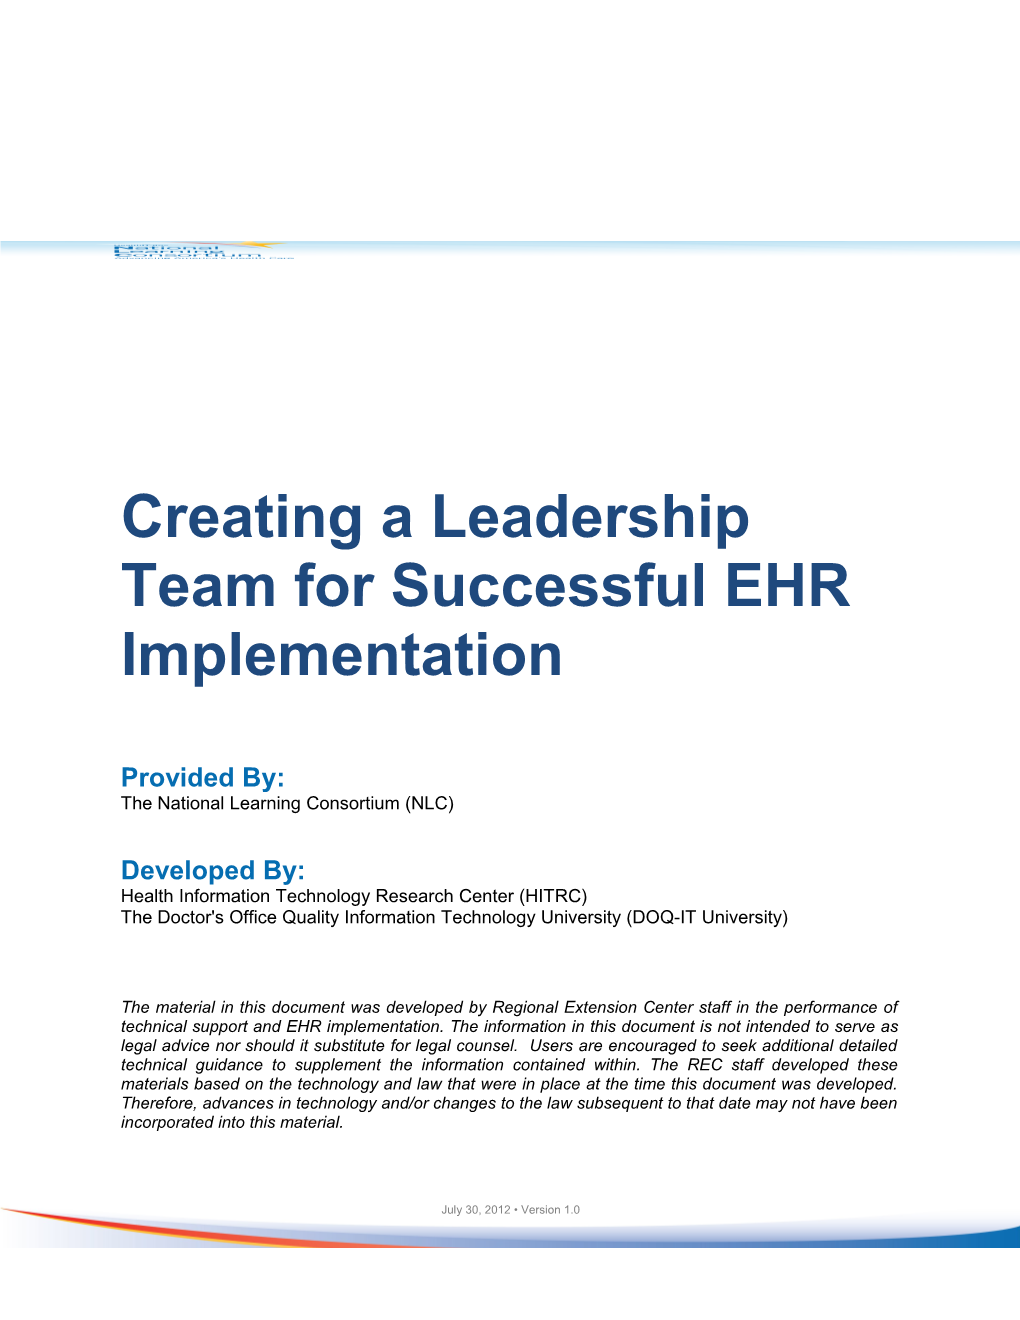 Creating a Leadership Team for Successful EHR Implementation